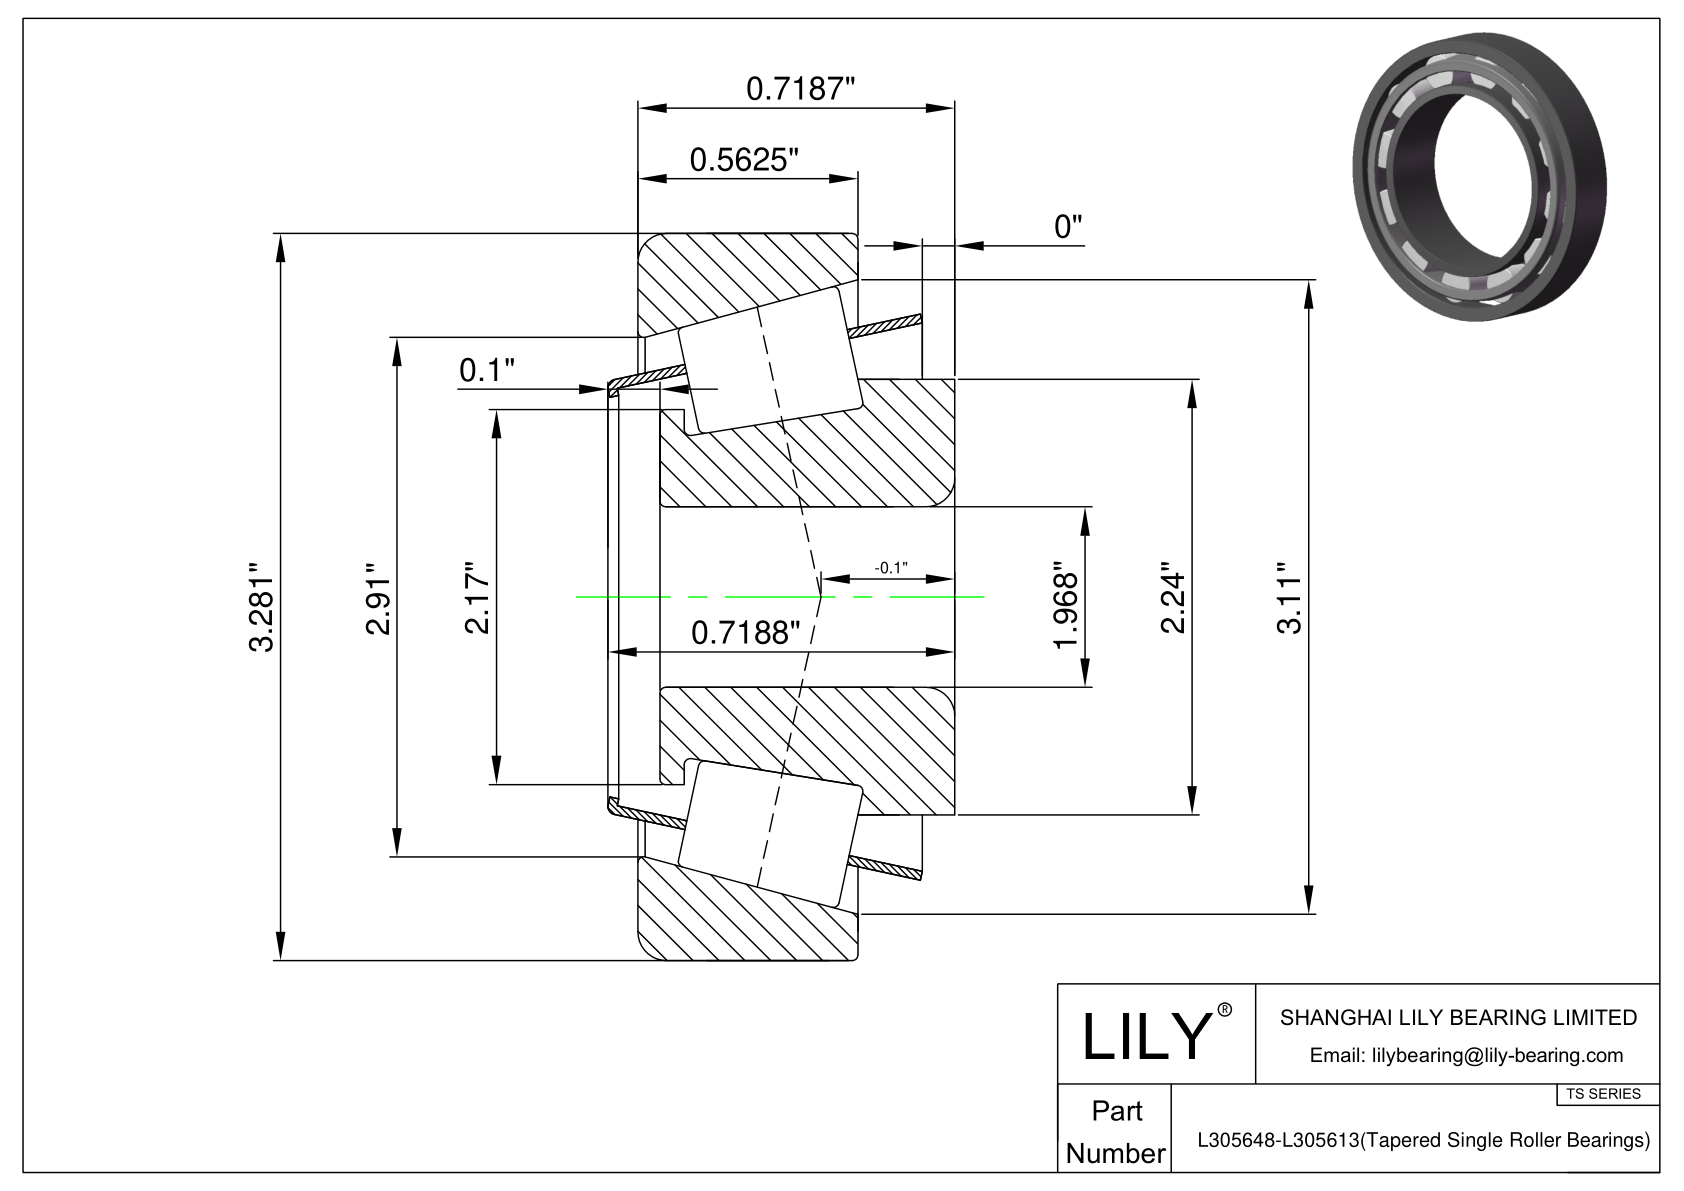 L305648-L305613 TS (Tapered Single Roller Bearings) (Imperial) cad drawing